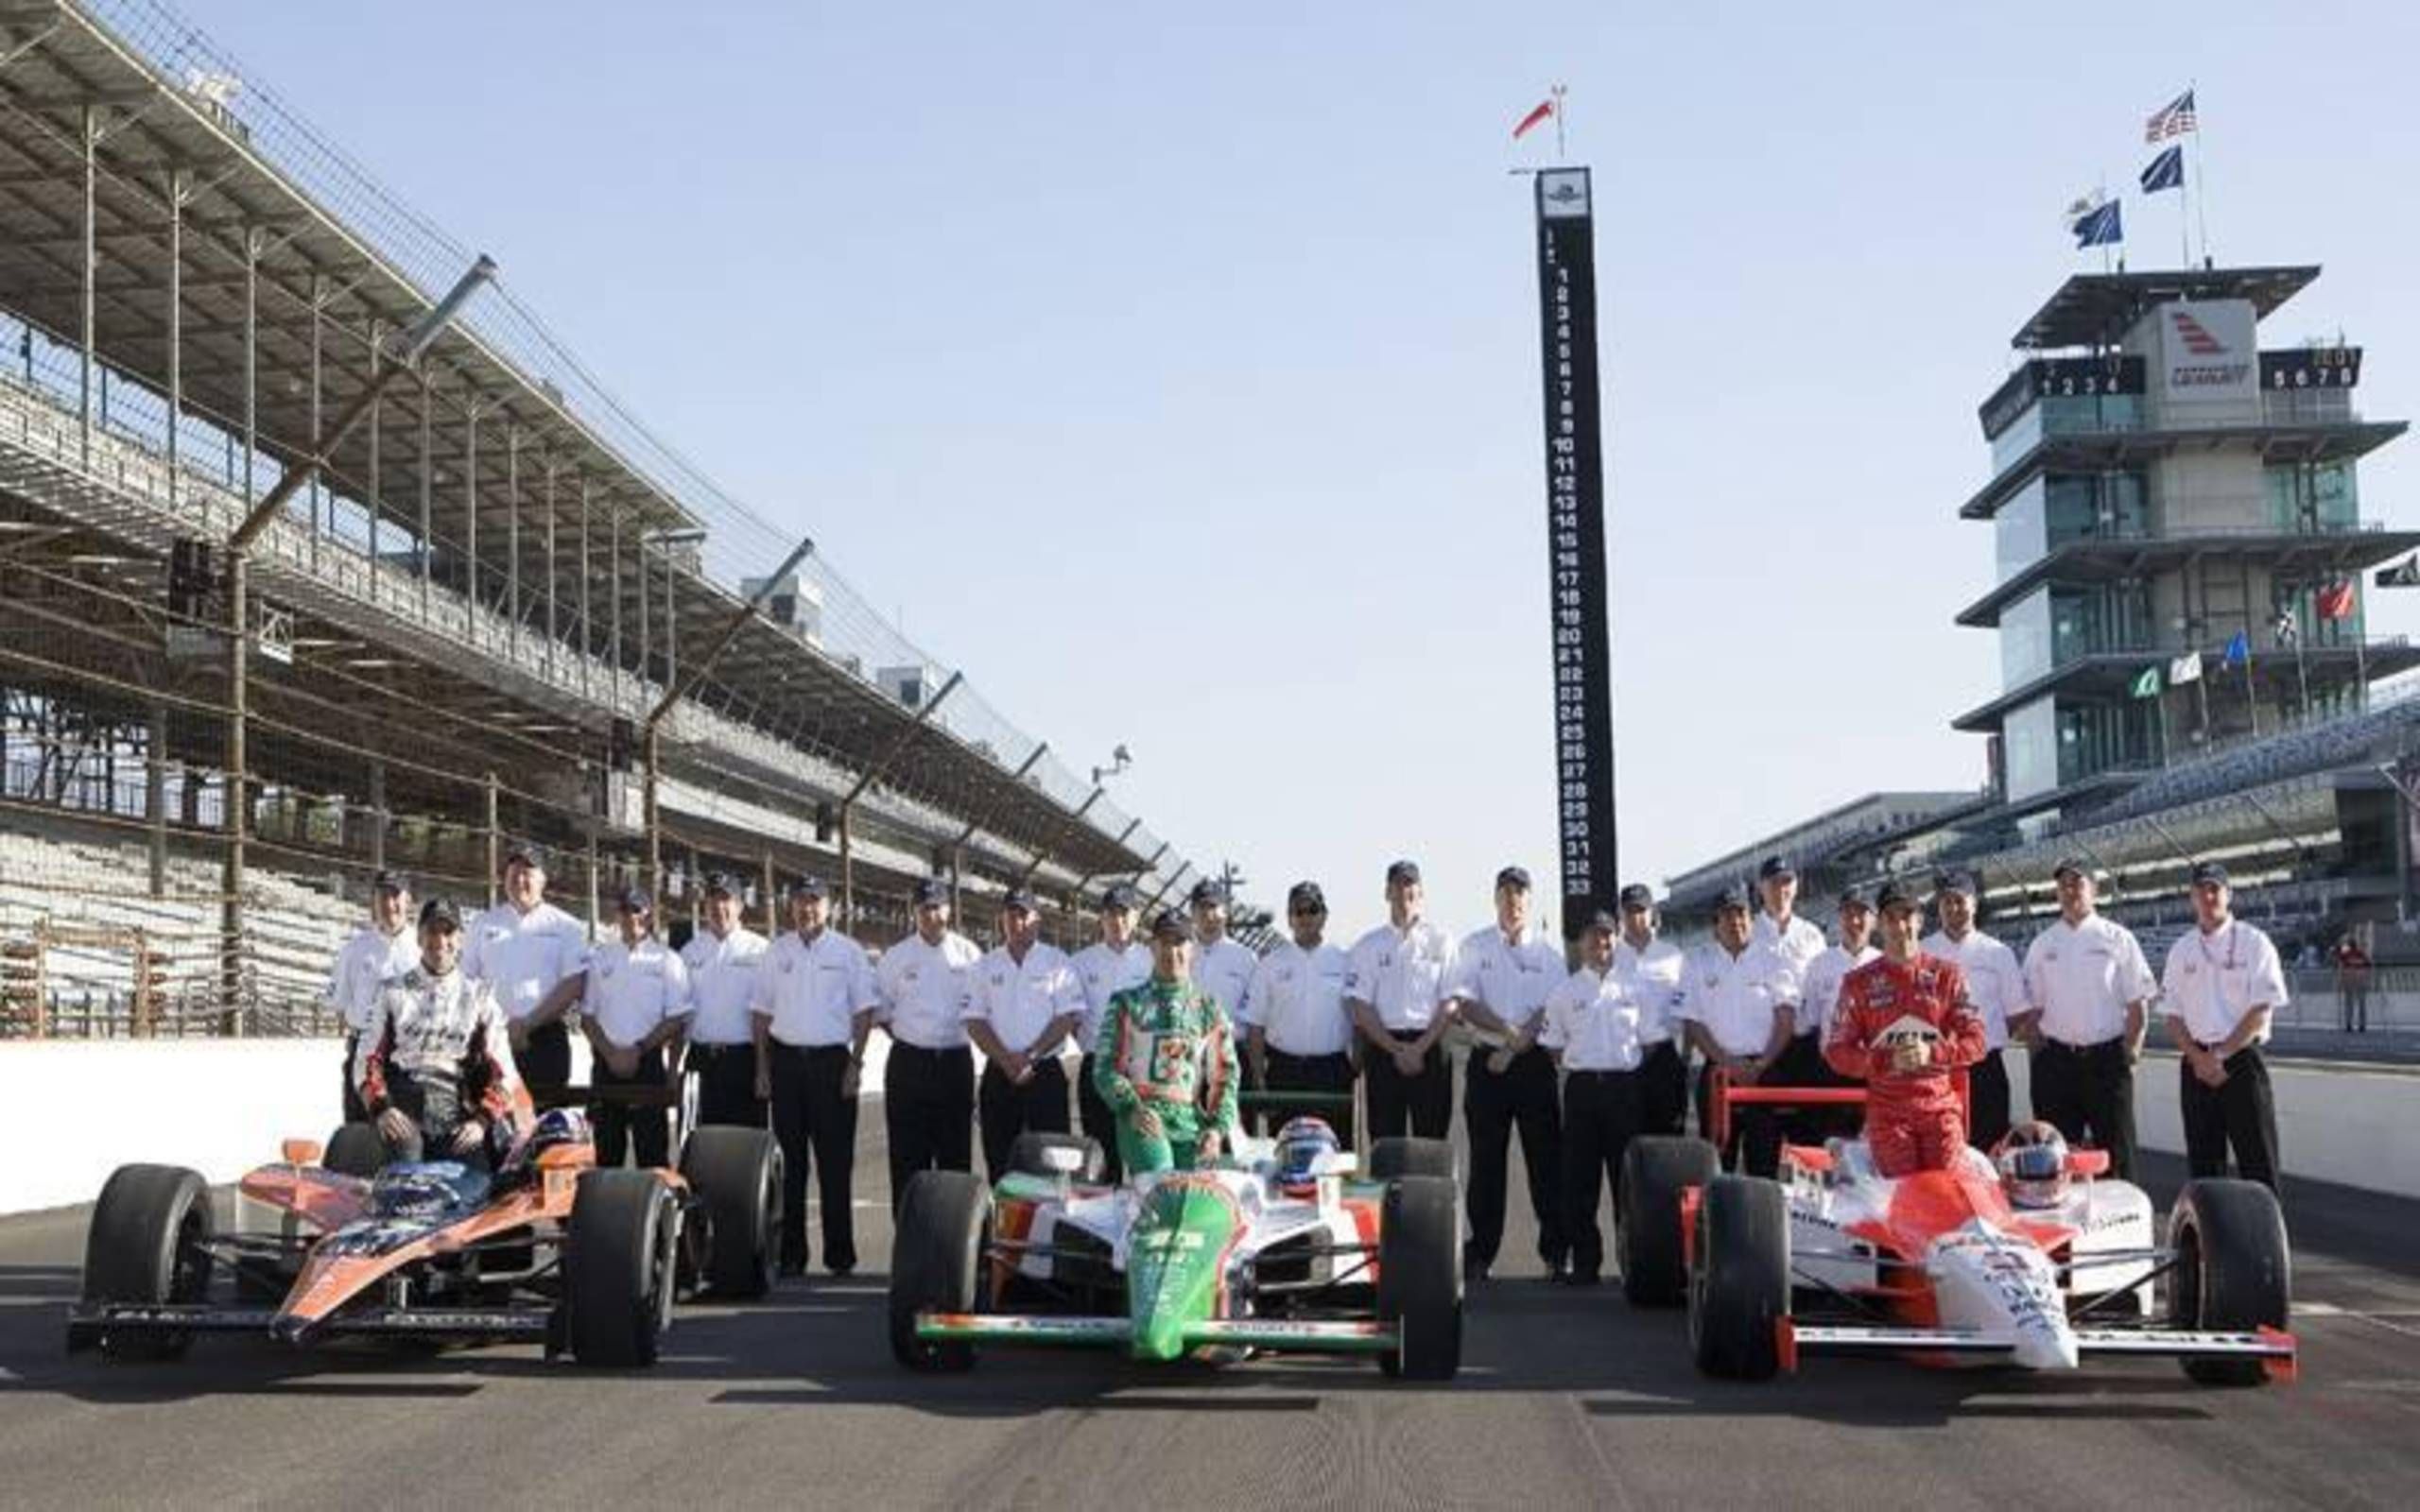 Start Your Engines The 07 Indianapolis 500 Is Good To Go